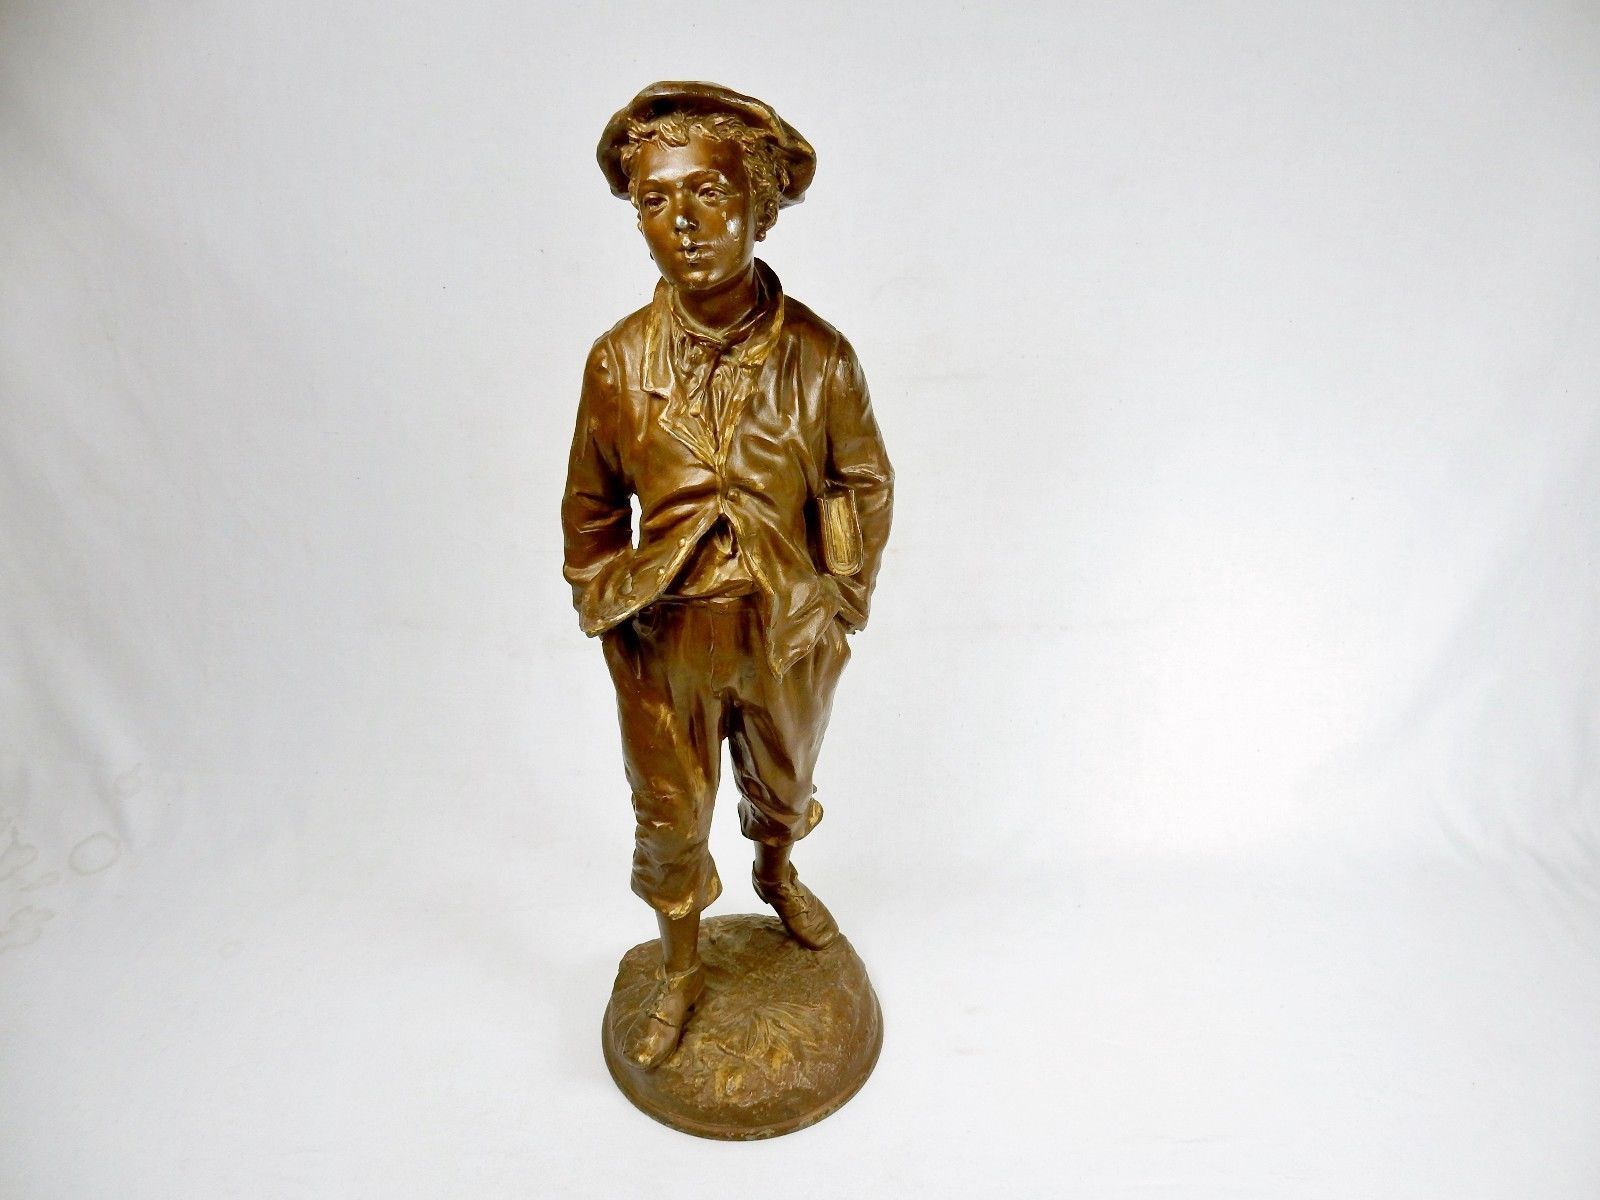 Primary image for 21" Bronze Figurine, School Boy Carrying Book, 1890s, Patina, C. Anfry, Signed